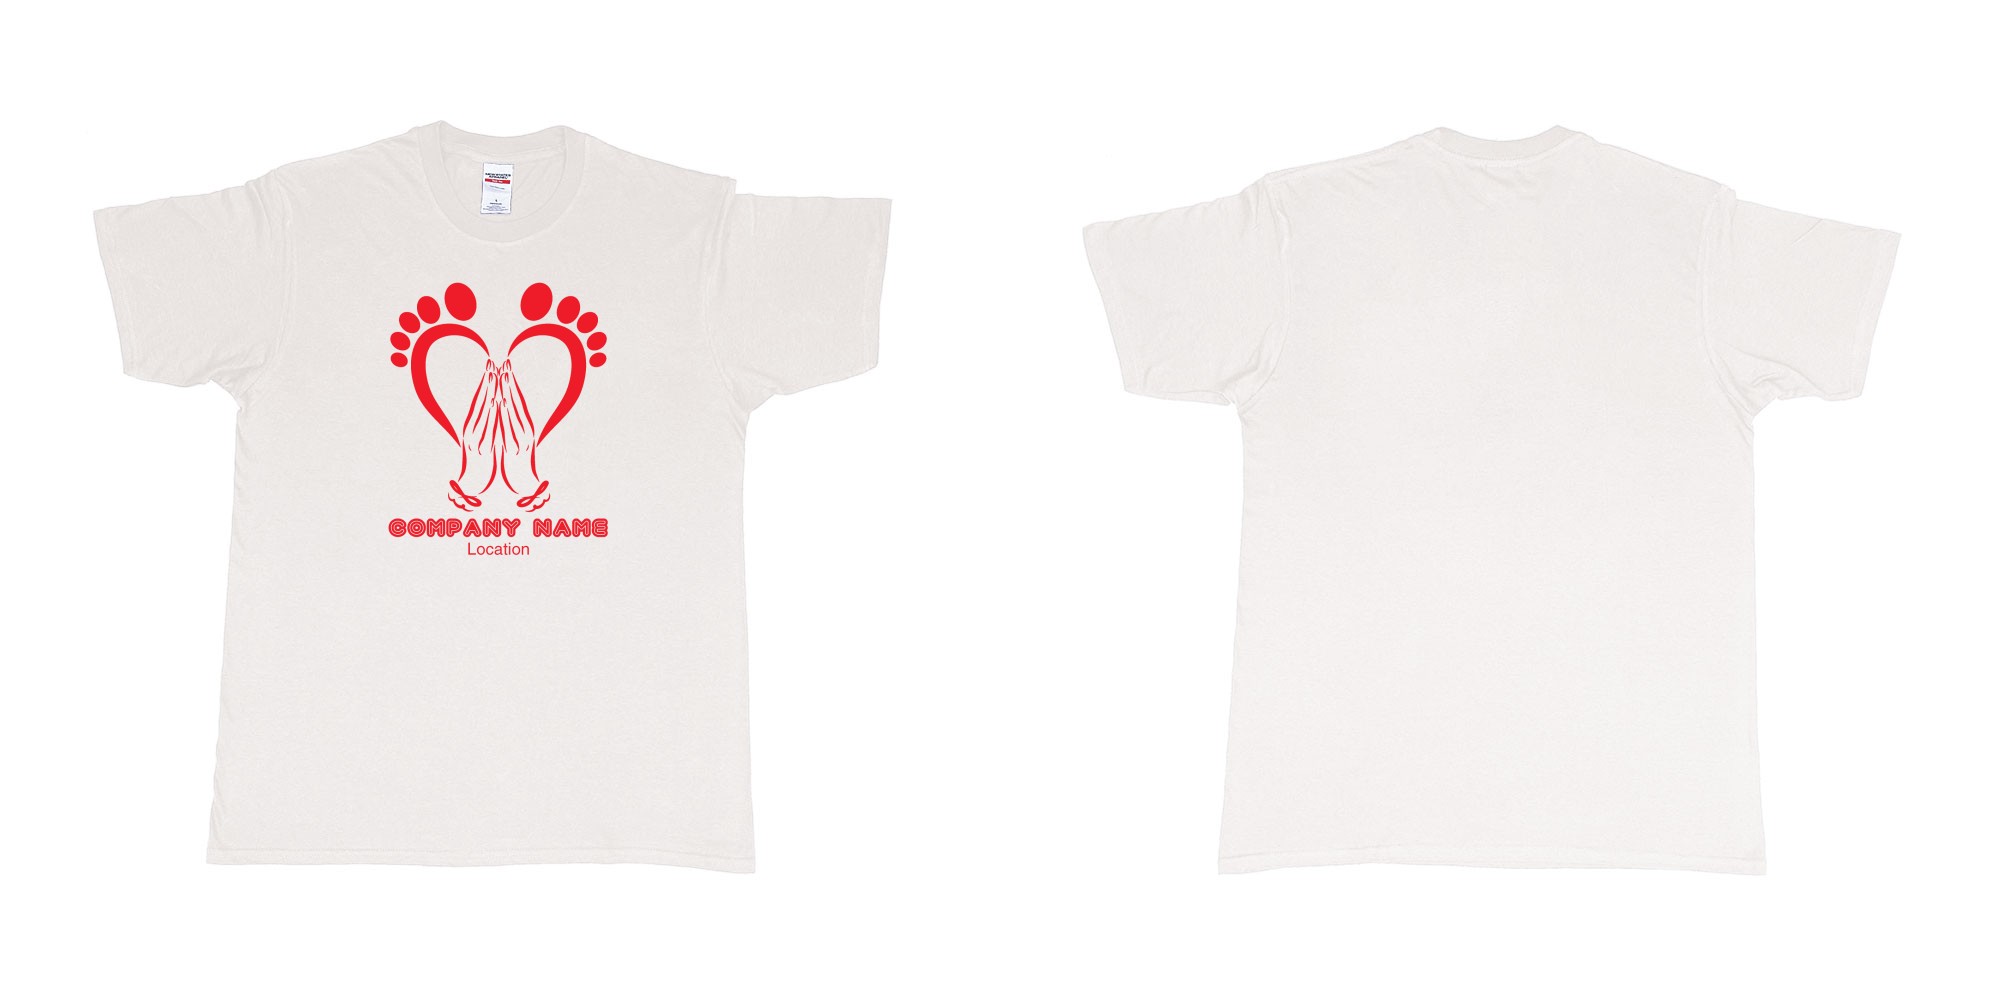 Custom tshirt design podiatrist chiropodist feet care specialist heart shaped feet with caring hands in fabric color white choice your own text made in Bali by The Pirate Way